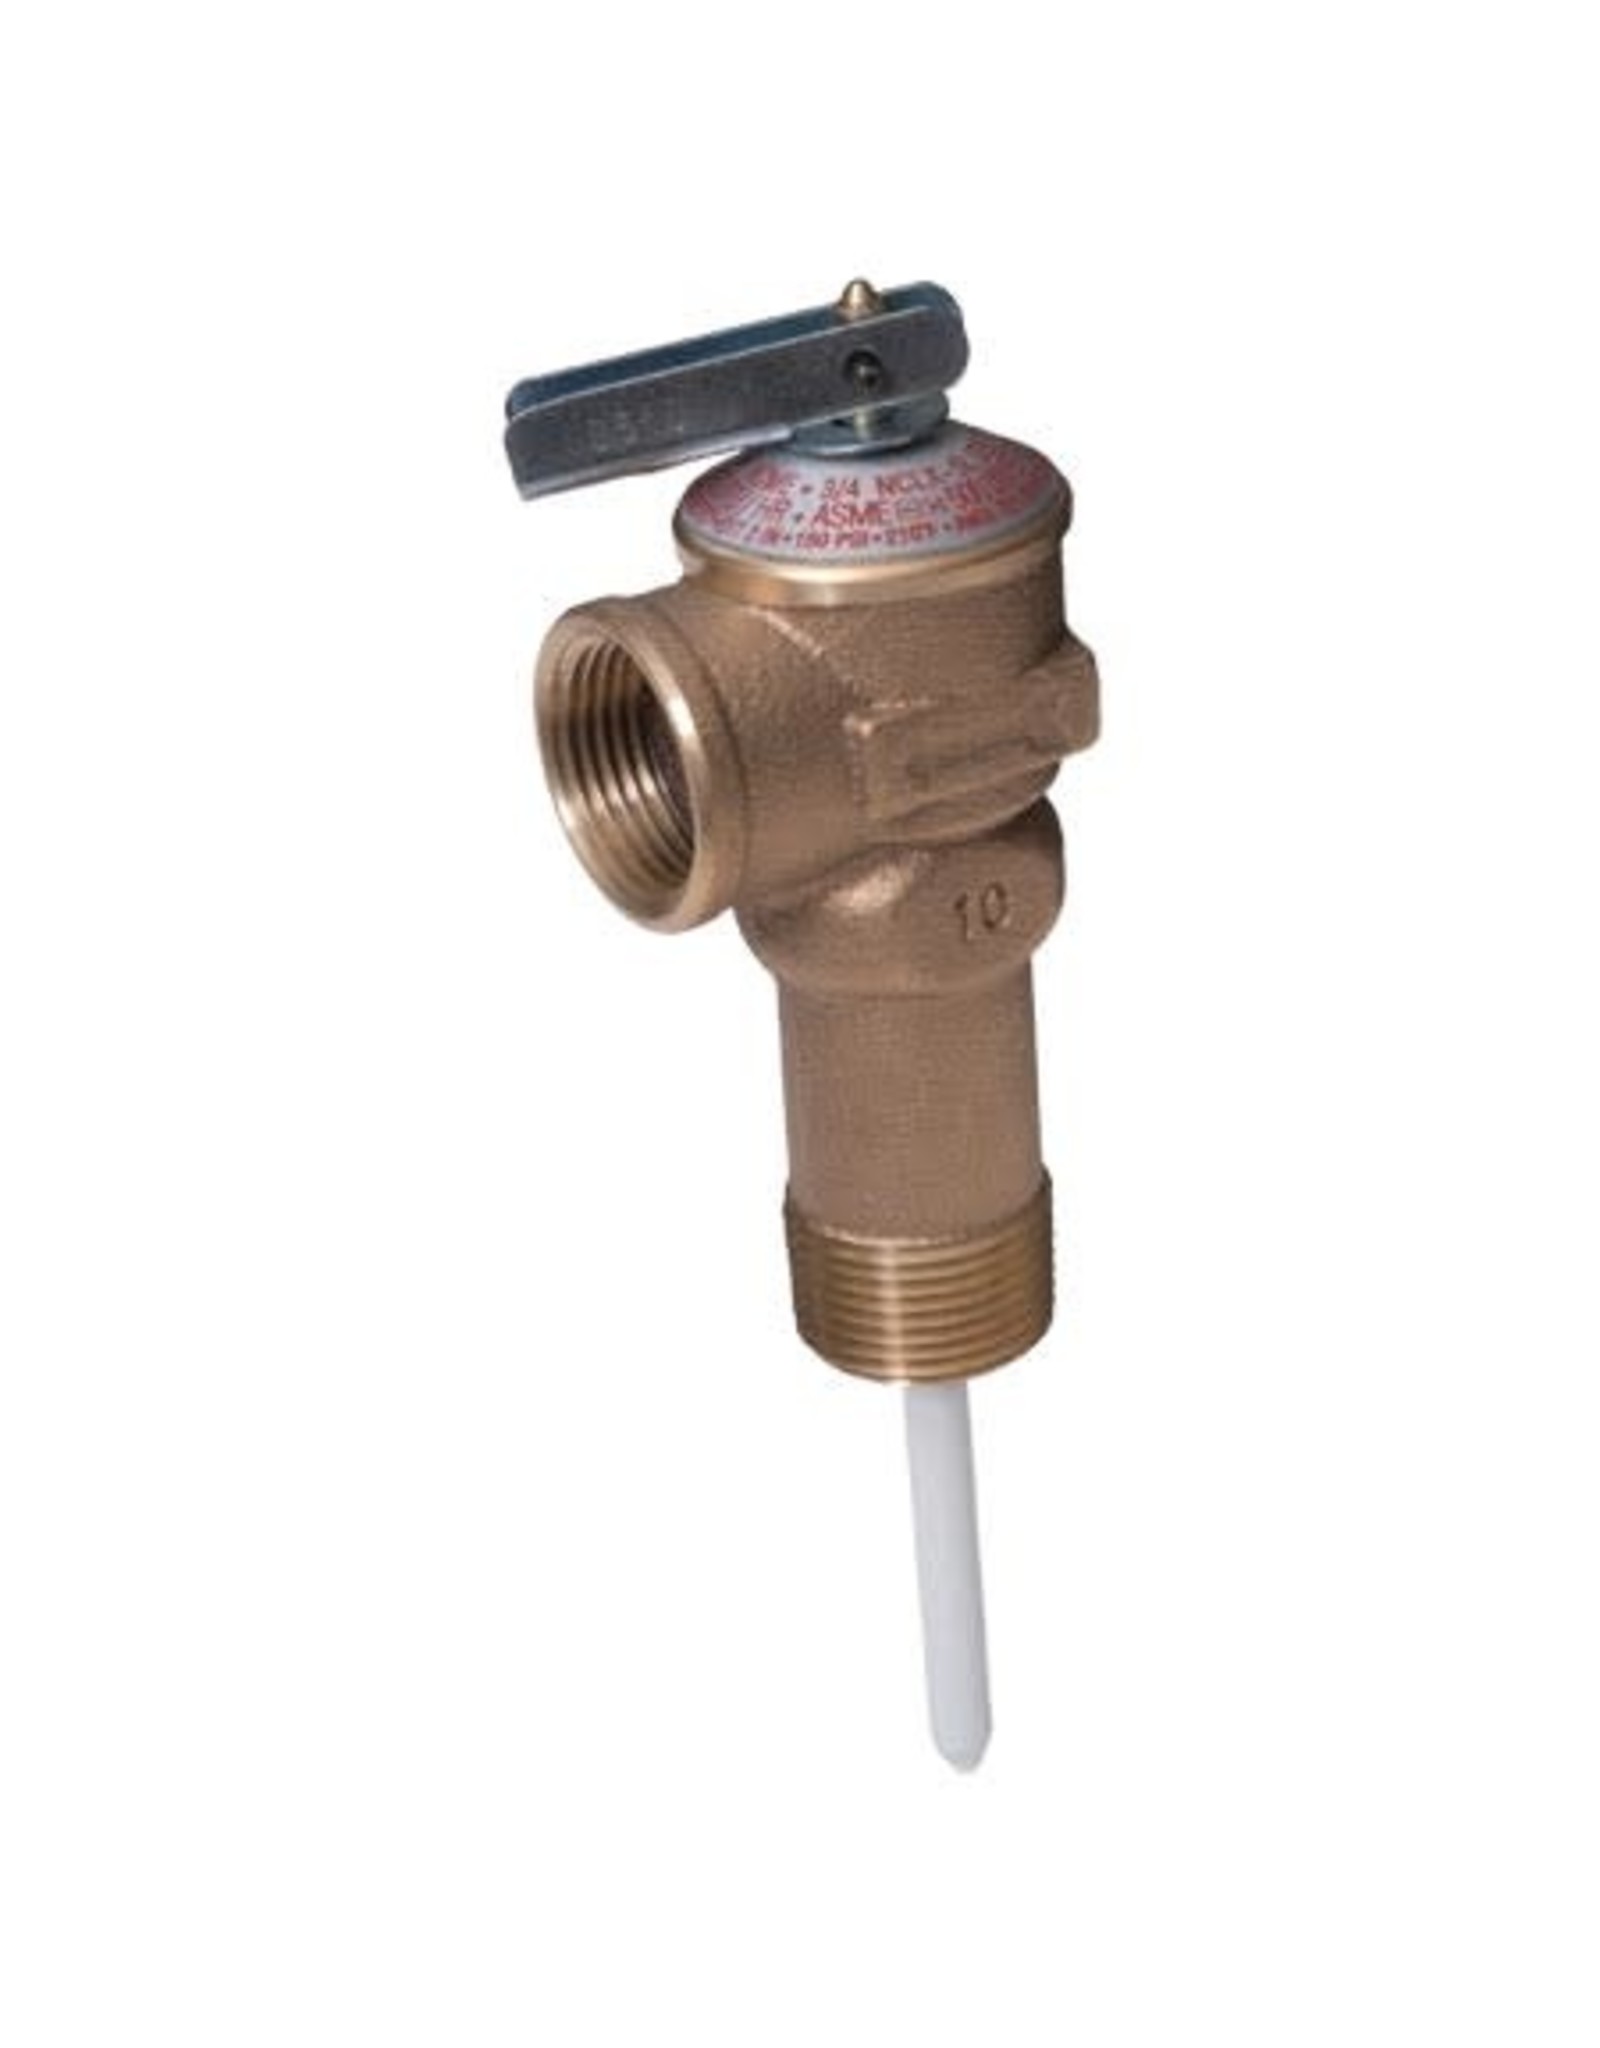 T & P RELIEF VALVE EXTENDED INLET 3/4